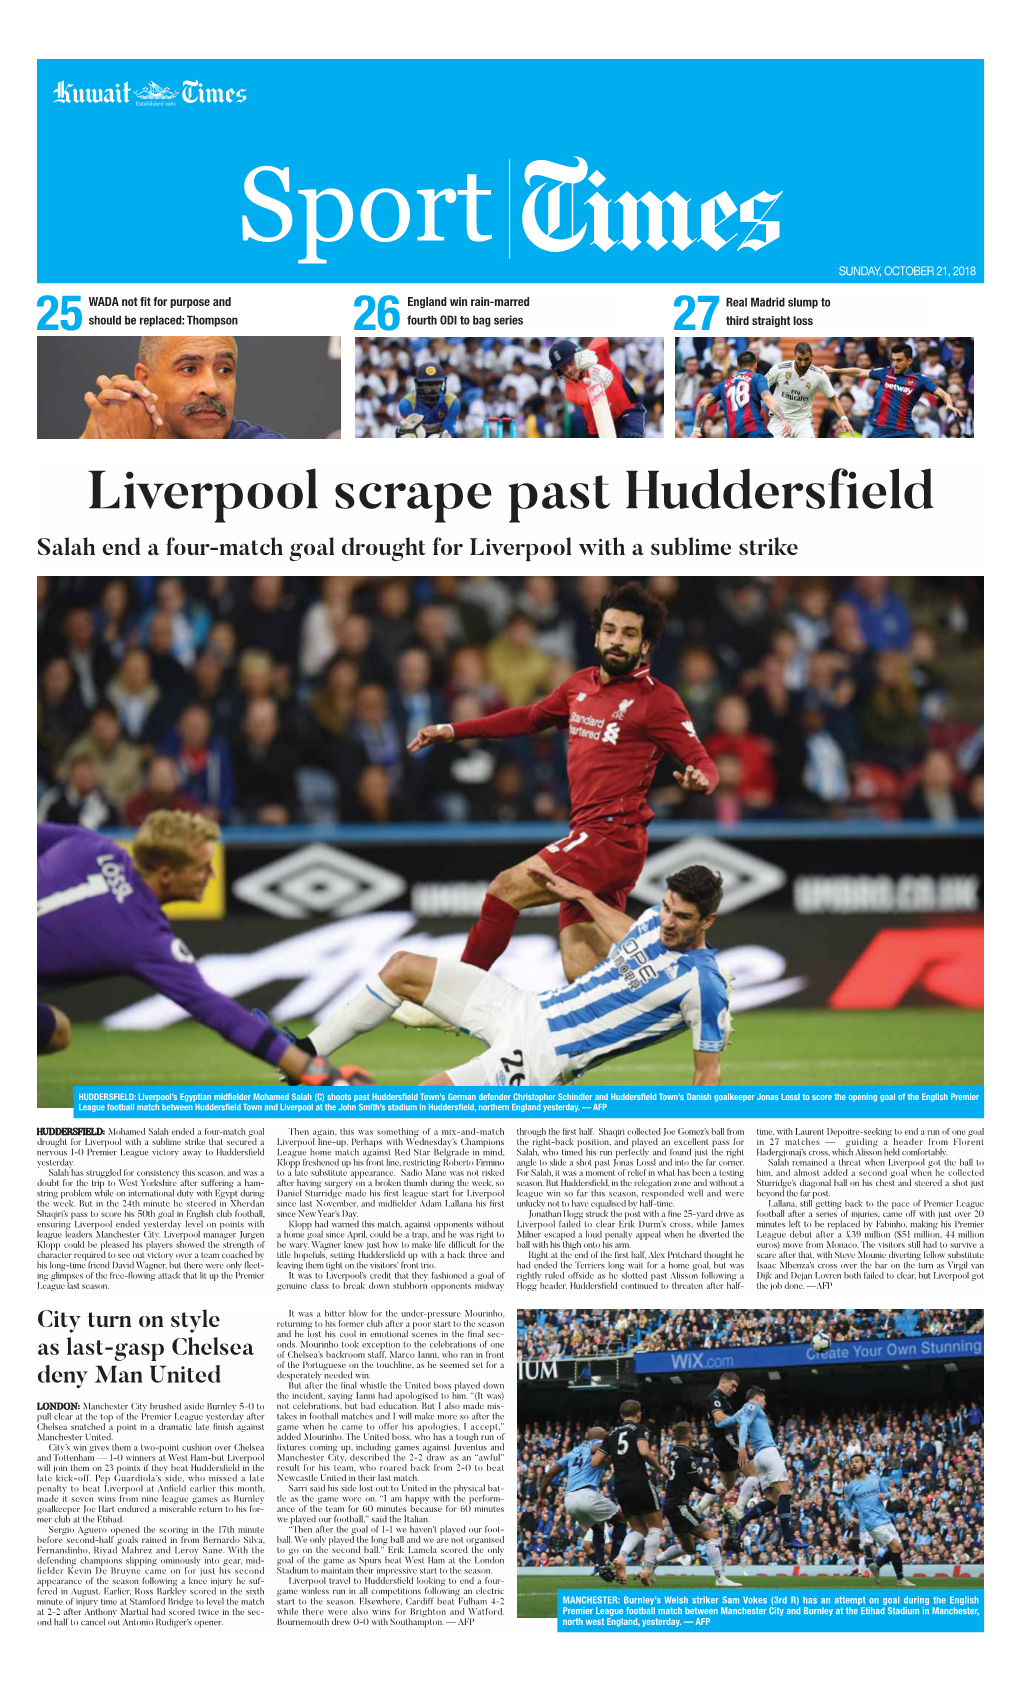 Liverpool Scrape Past Huddersfield Salah End a Four-Match Goal Drought for Liverpool with a Sublime Strike